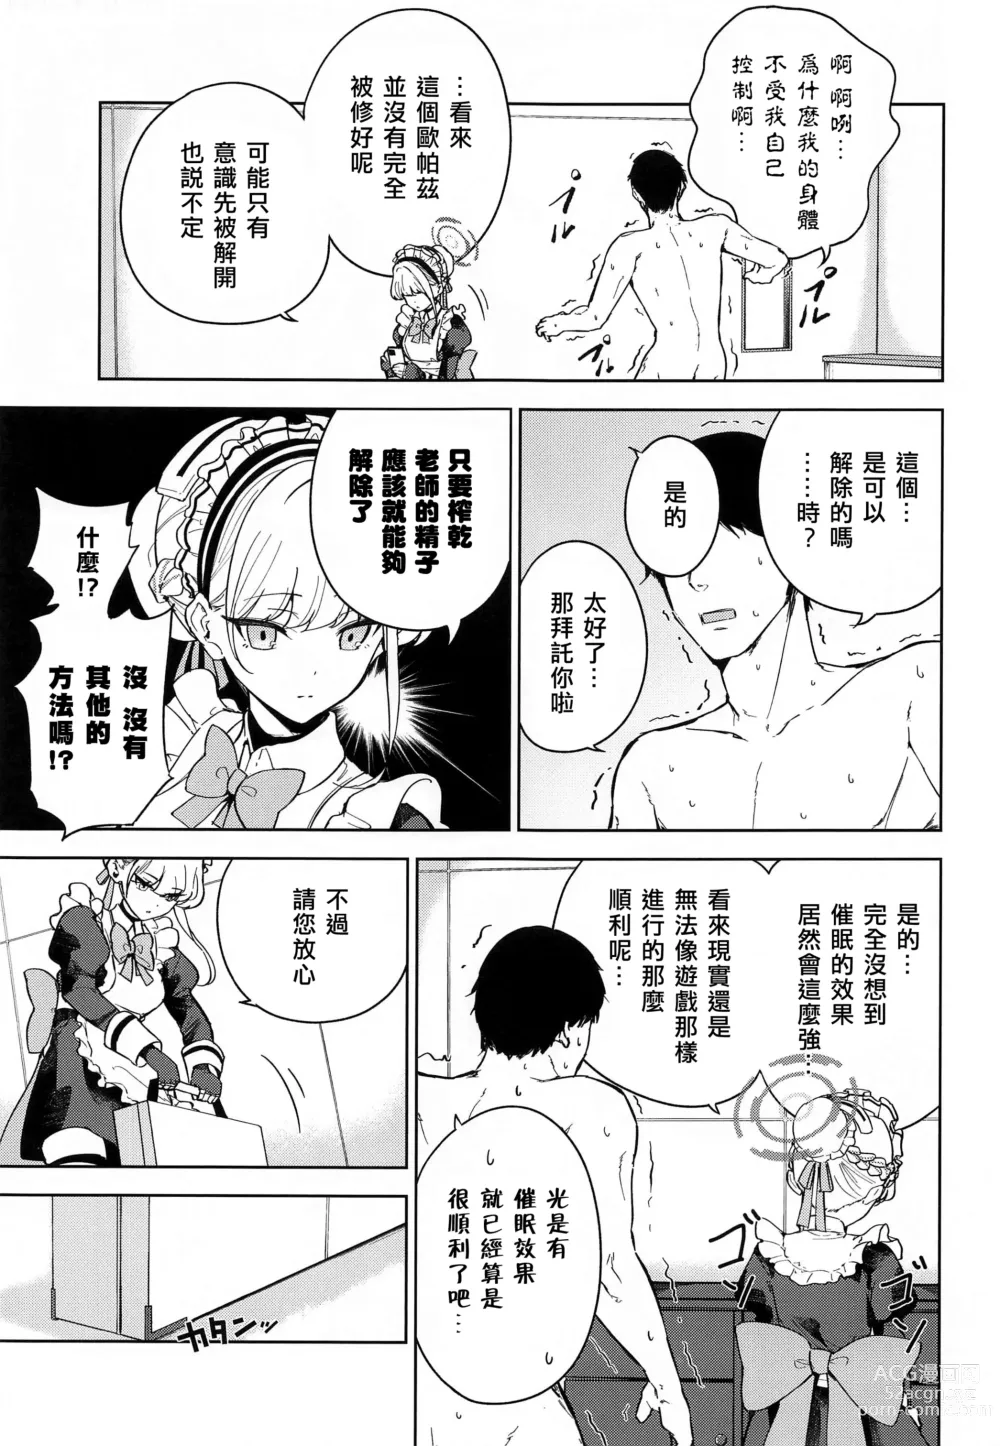 Page 10 of doujinshi Made in Maid